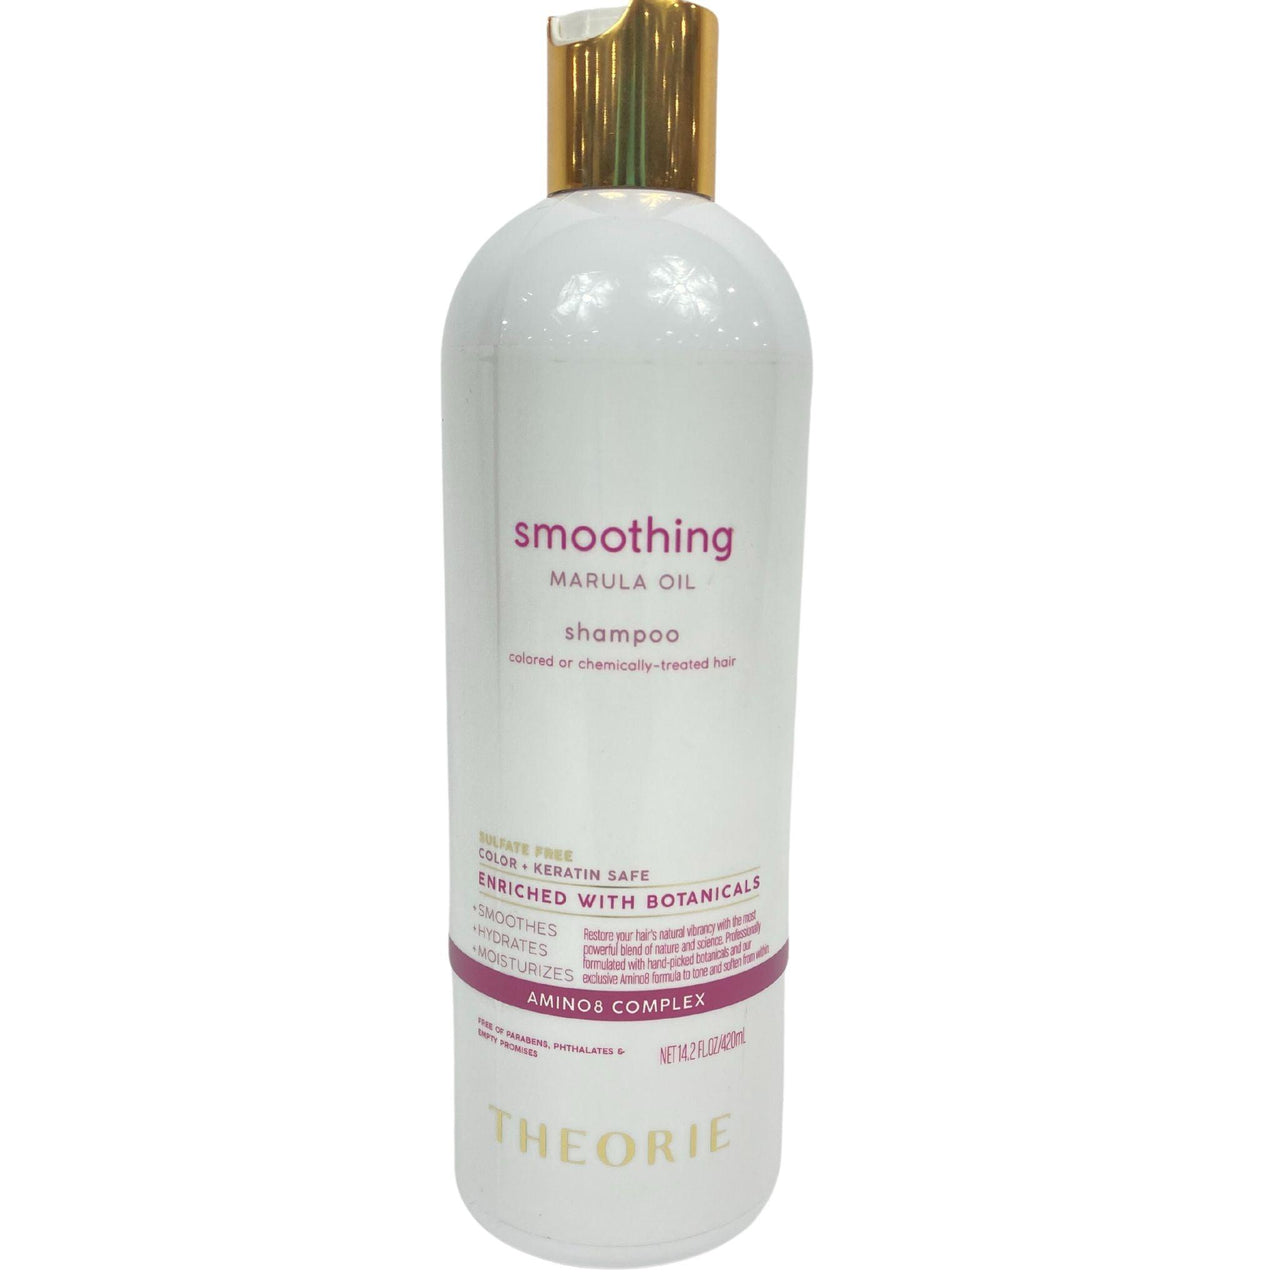 Theorie Smoothing Marula Oil Shampoo Color + Keratin Safe Enriched With Botanicals 14.2FL.OZ (48 Pcs Lot) - Discount Wholesalers Inc